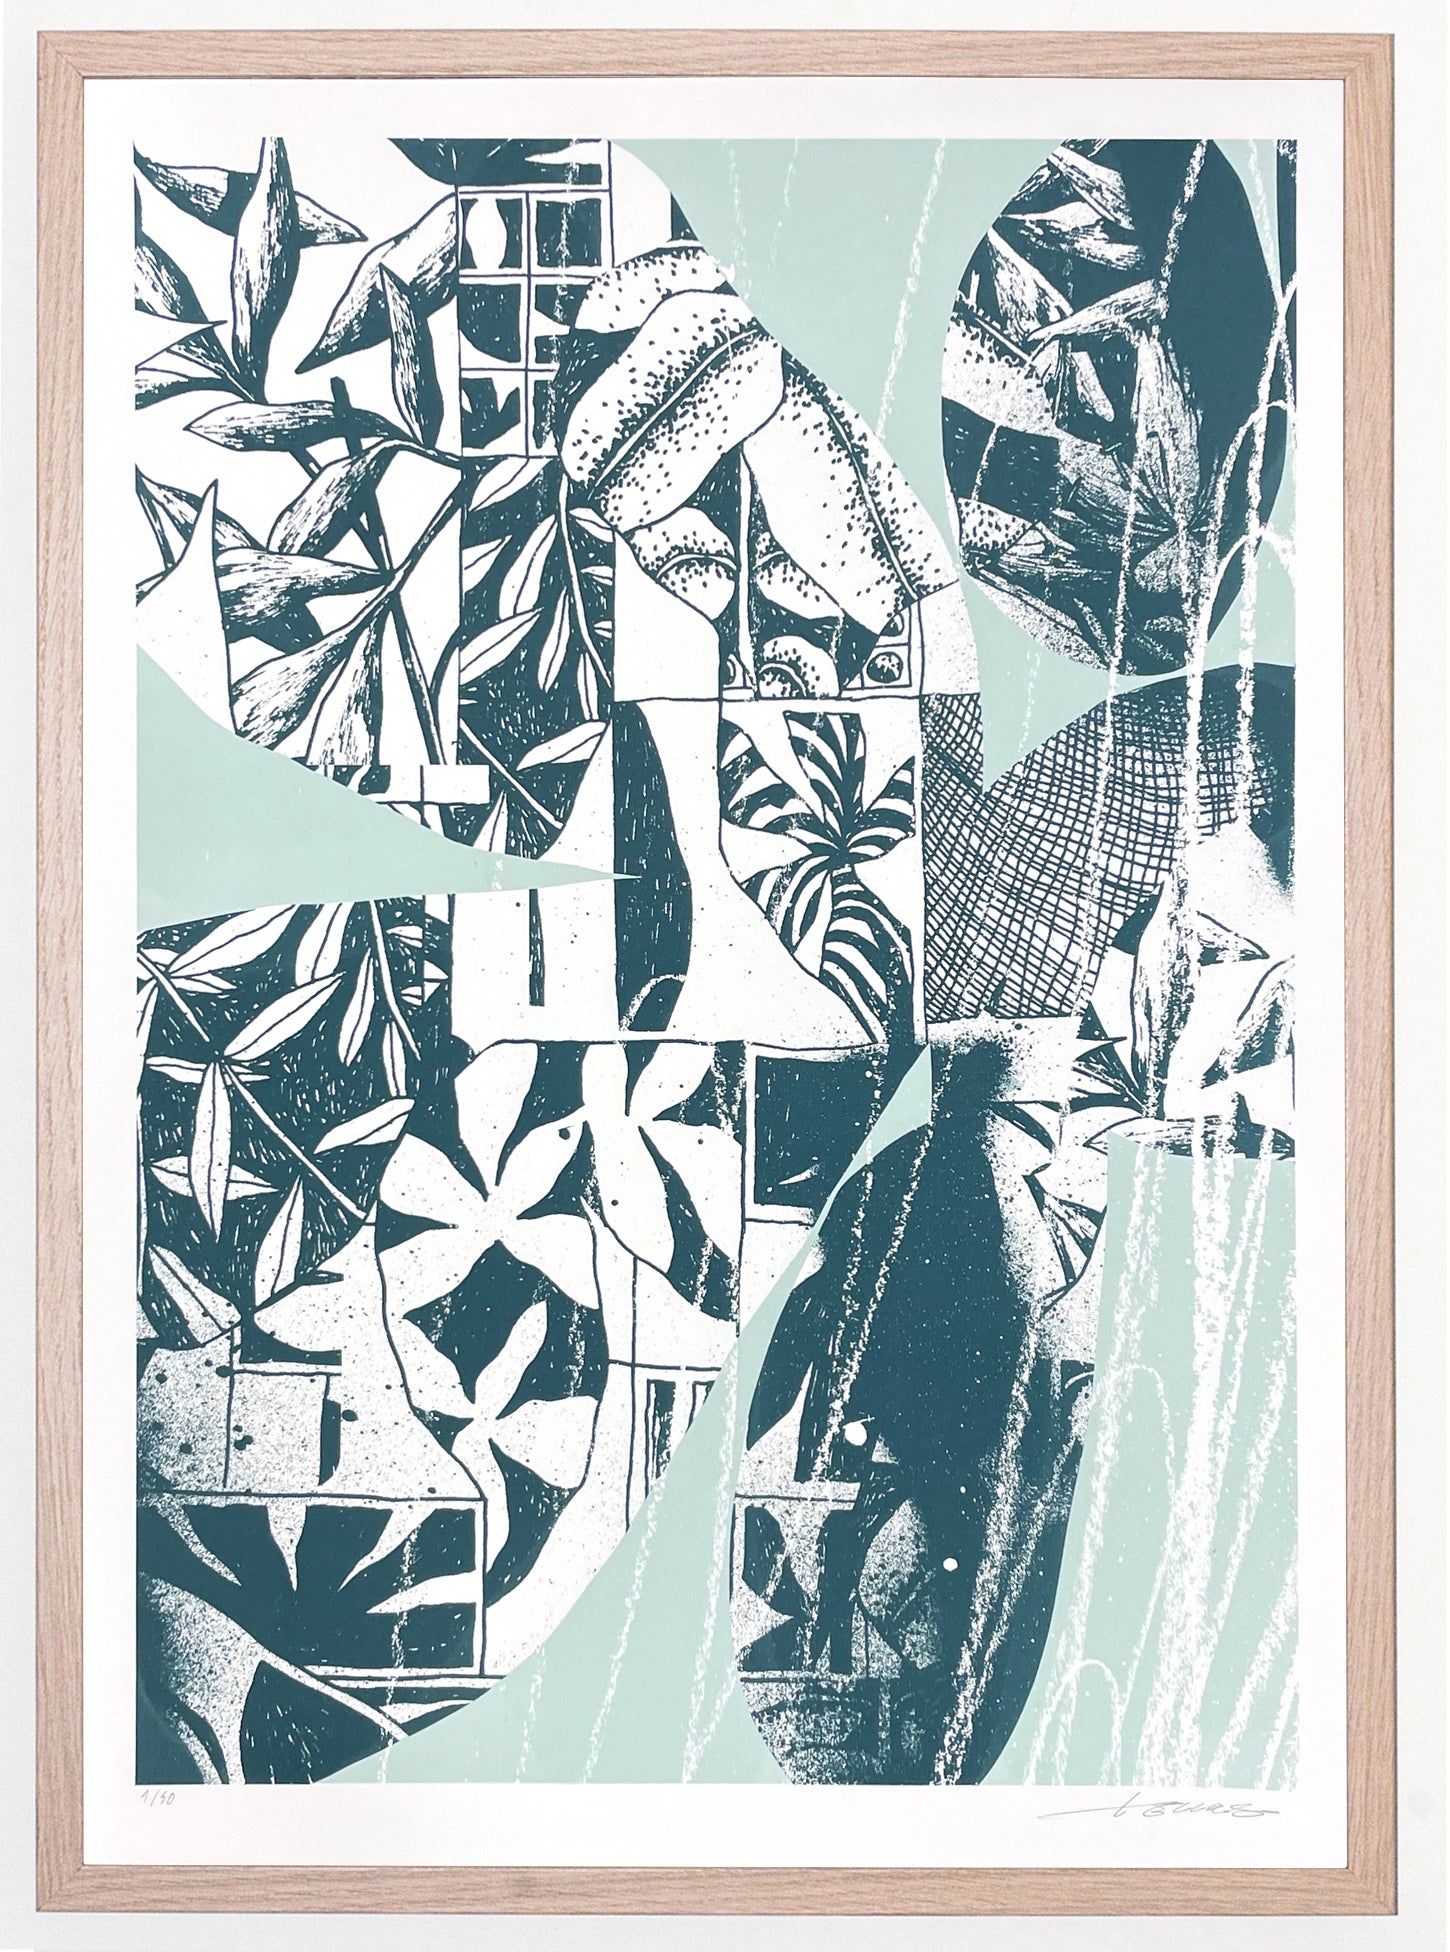 Limited edition print by Tellas for The Jaunt of abstract foliage in dark and light green on a white background 